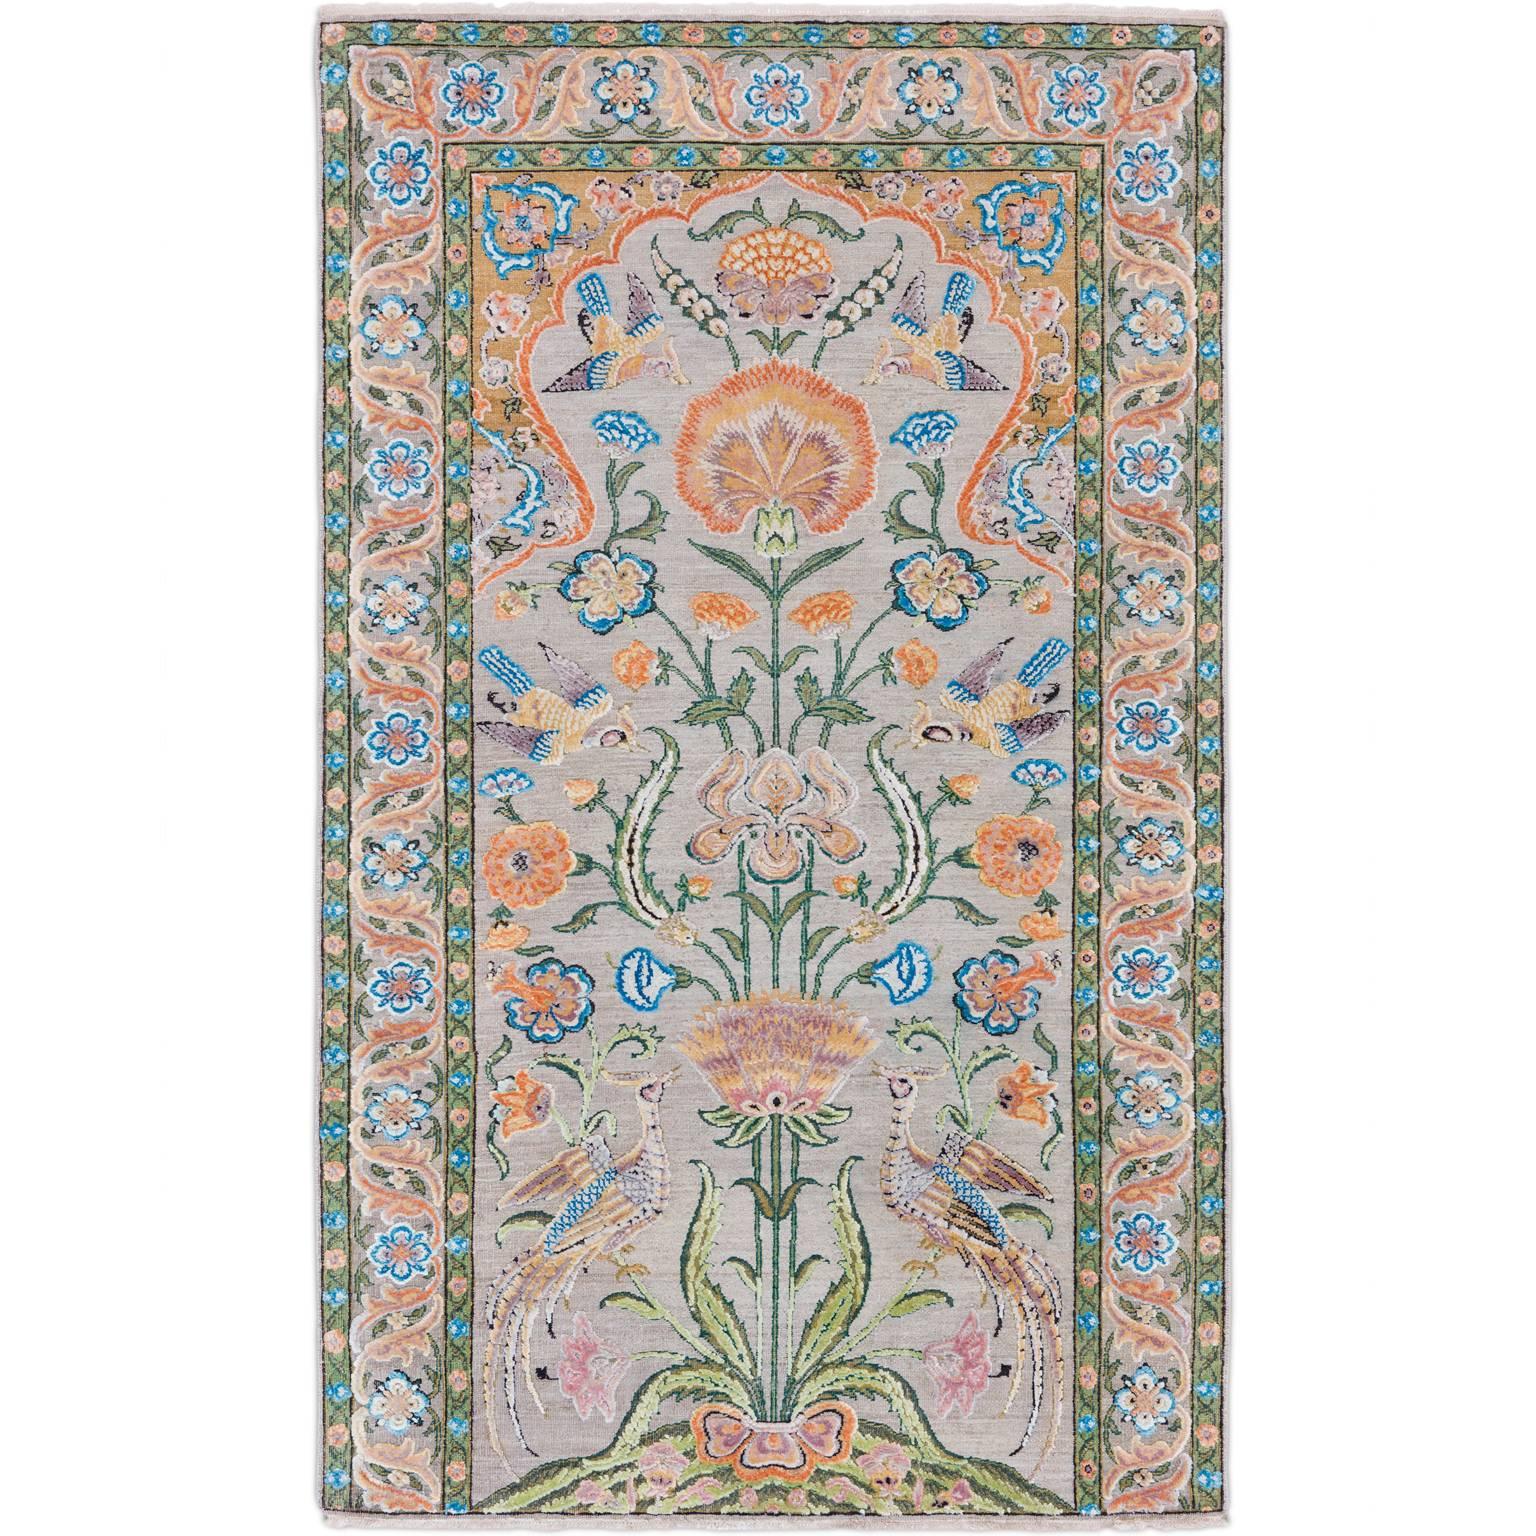 '17th Century Classic_Mughal No. 02'  Jaipur Persian Knot Vintage Rug Wool Silk For Sale